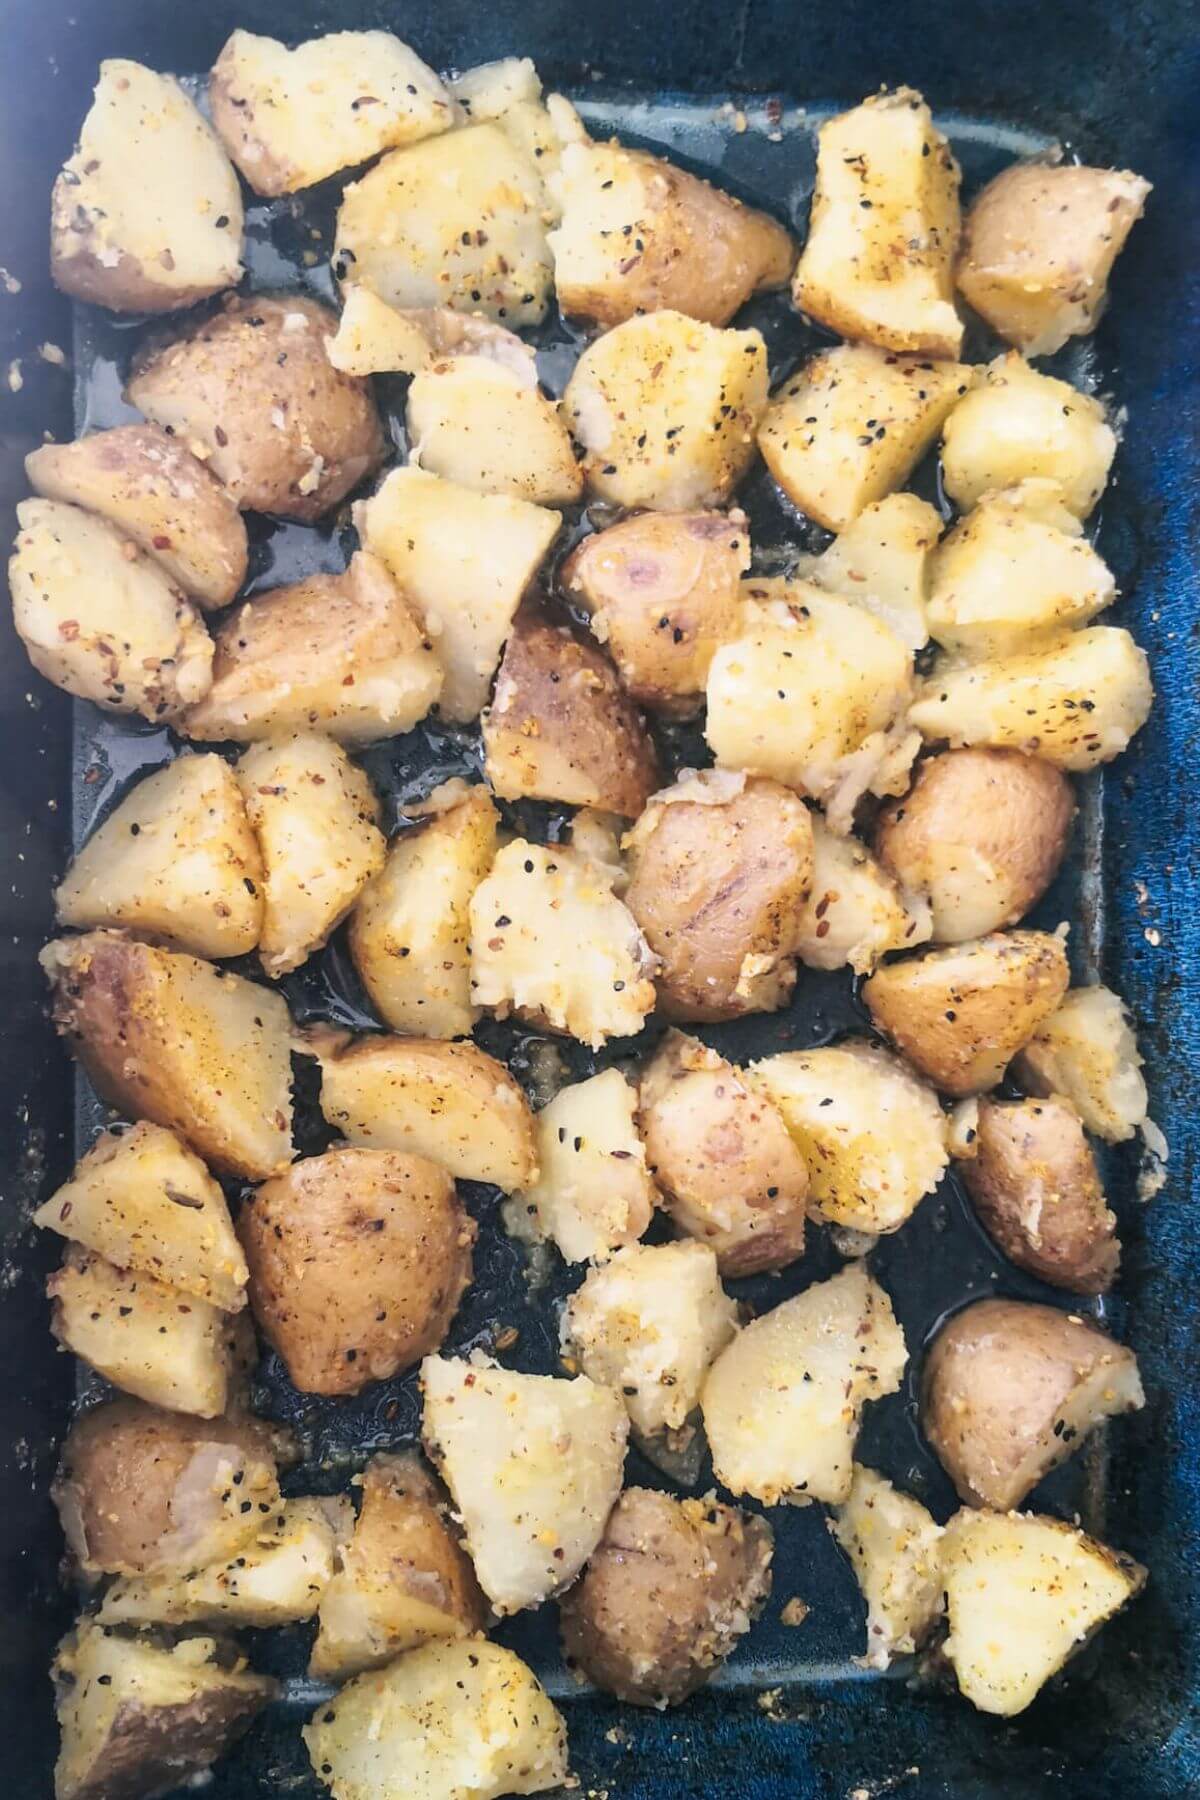 Dukkah potatoes in a large blue oven dish ready to go into the oven.